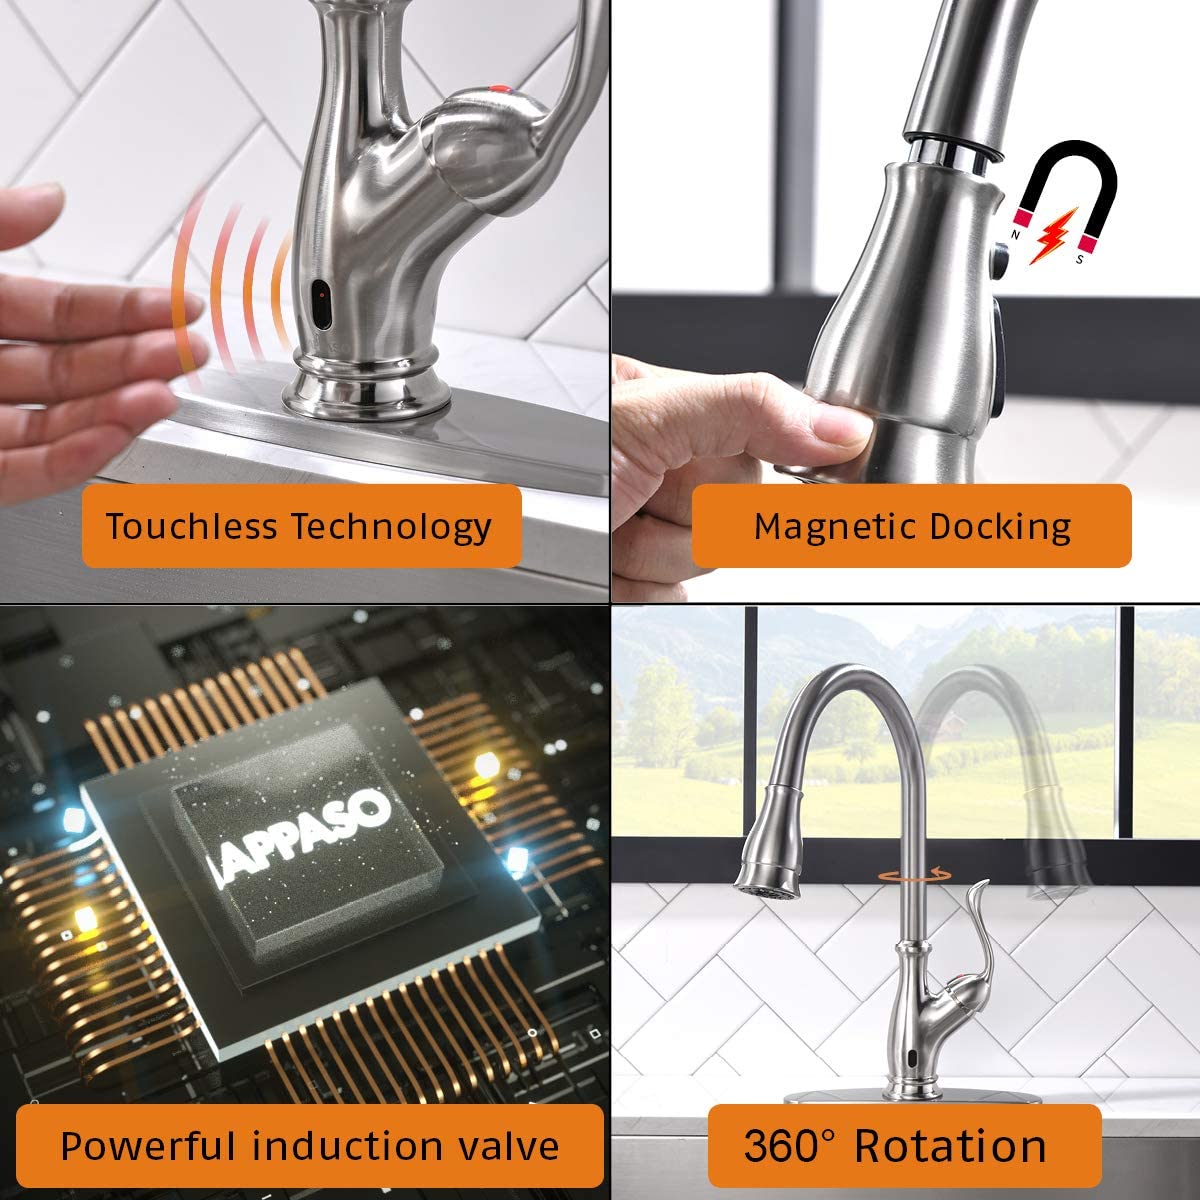 APS170TL Infrared  Motion Senor Hands-Free Kitchen Faucet with brush and soap bottle